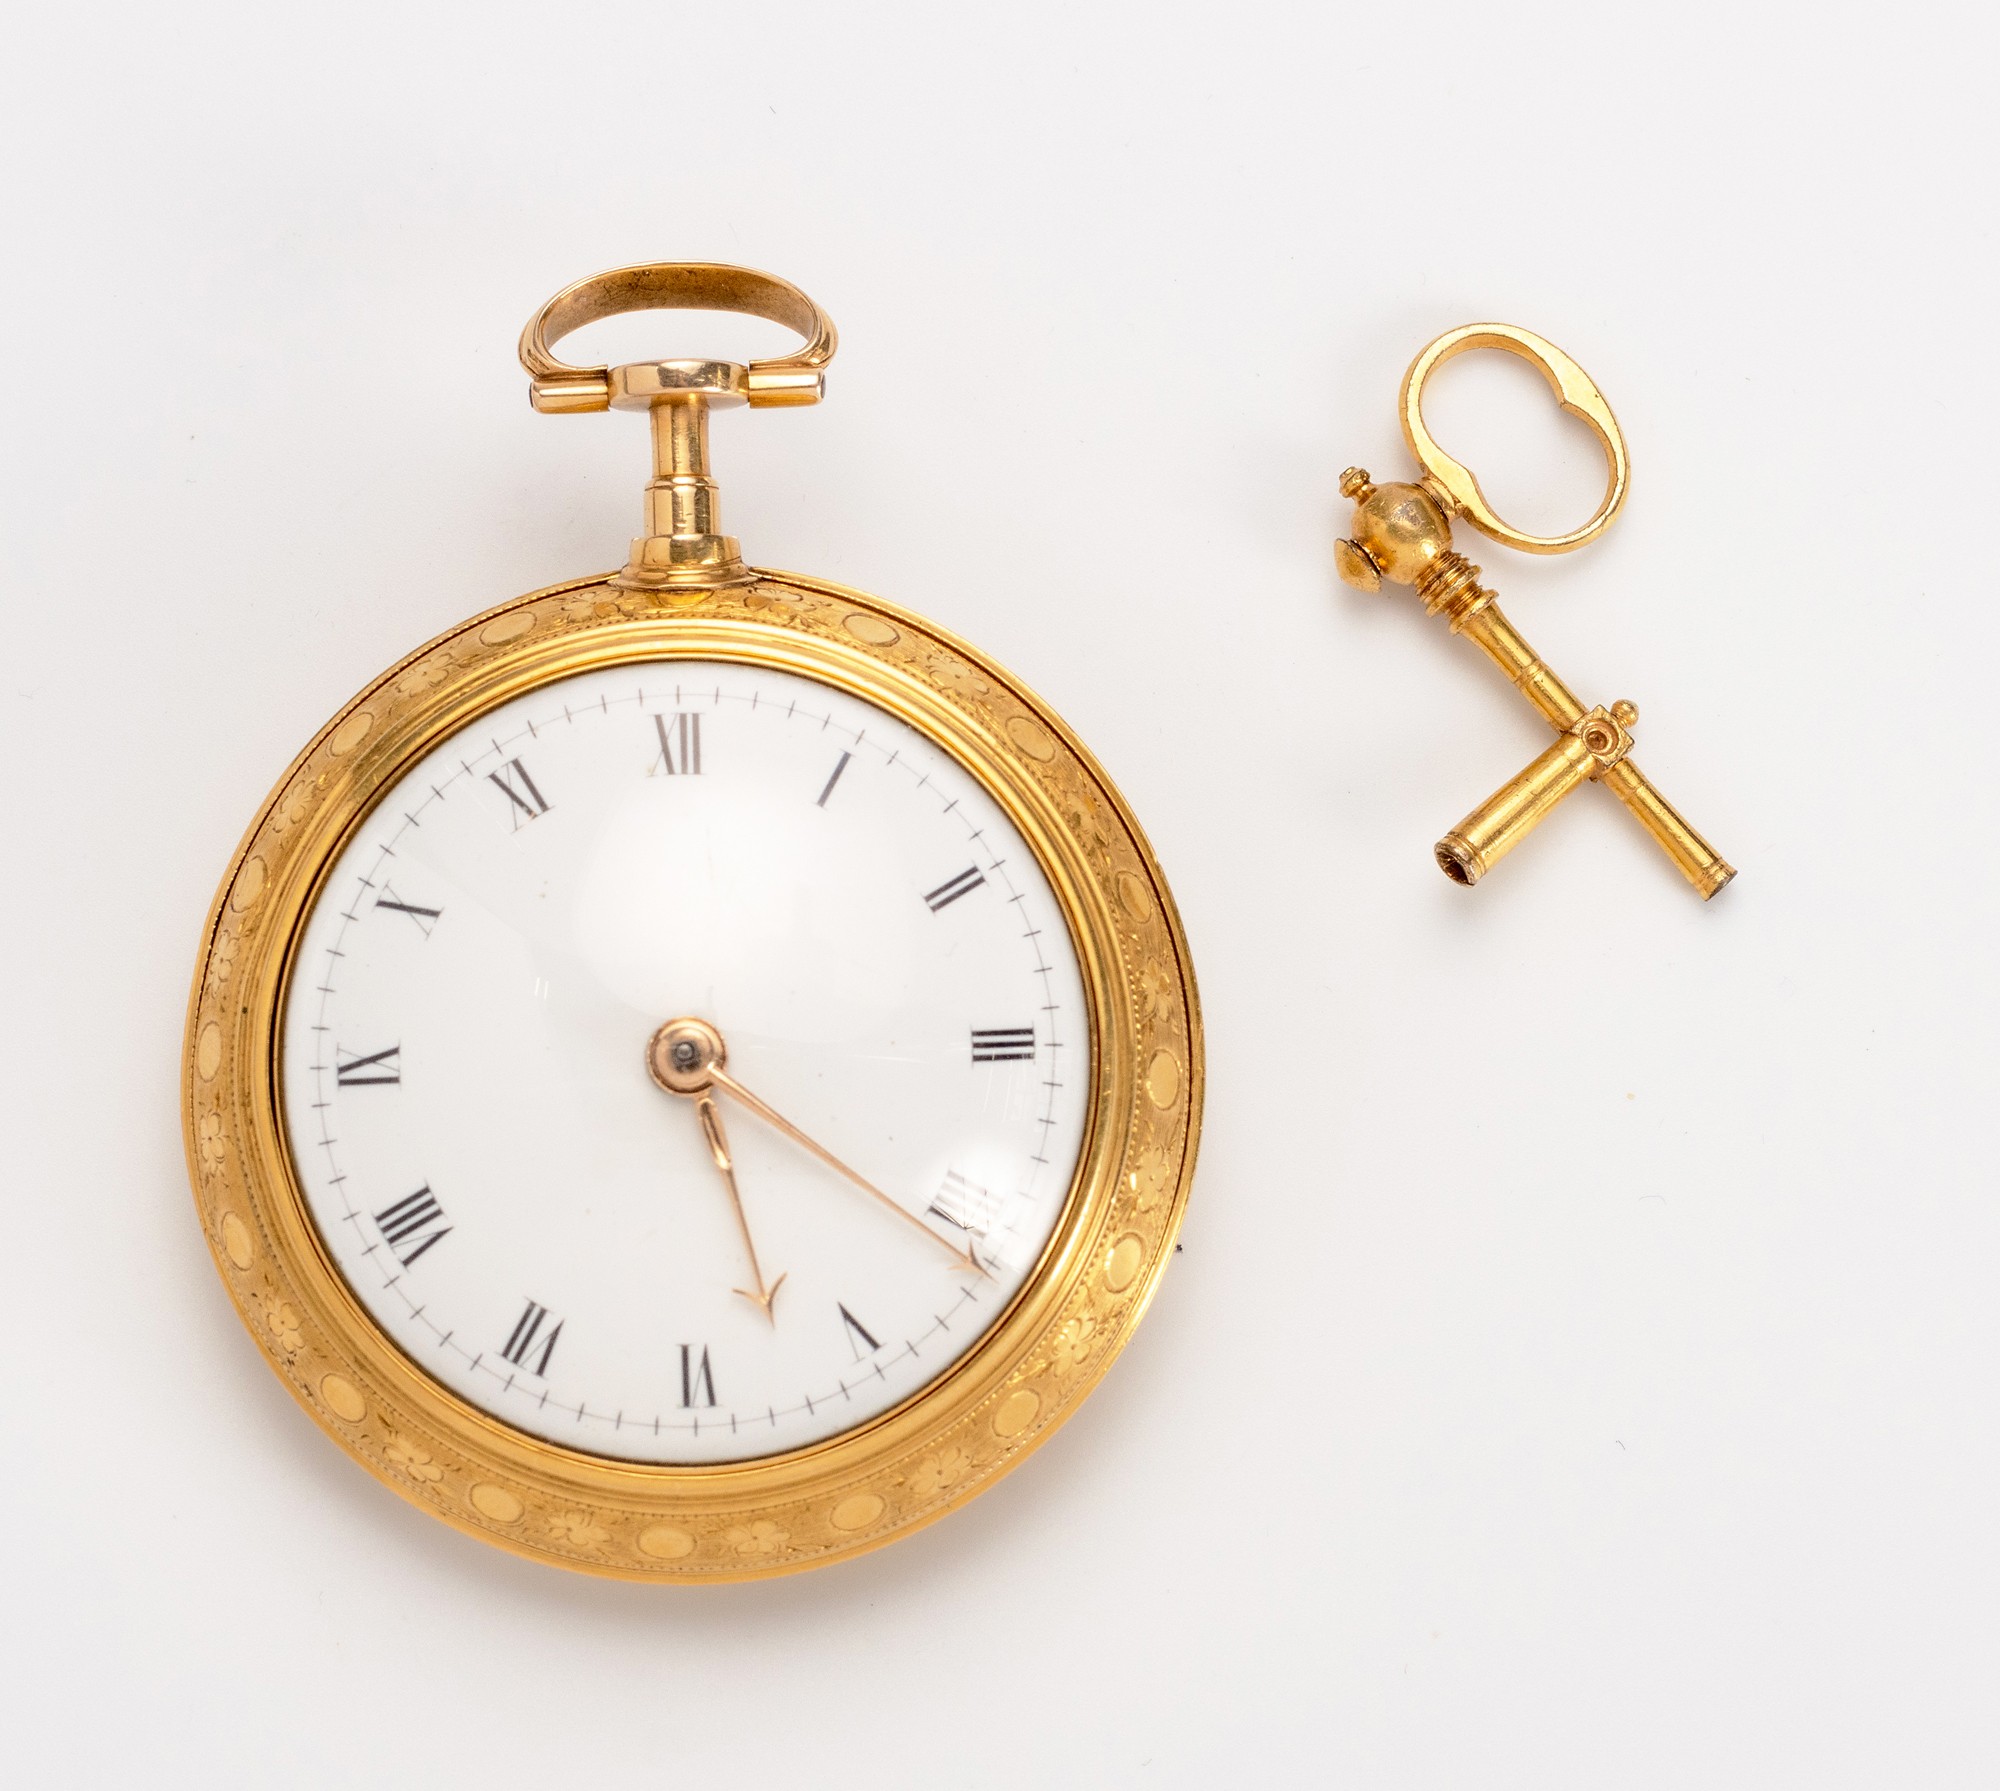 A BARRAUD 22CT GOLD PAIR CASED POCKET WATCH, THE CASE MARKED HPC